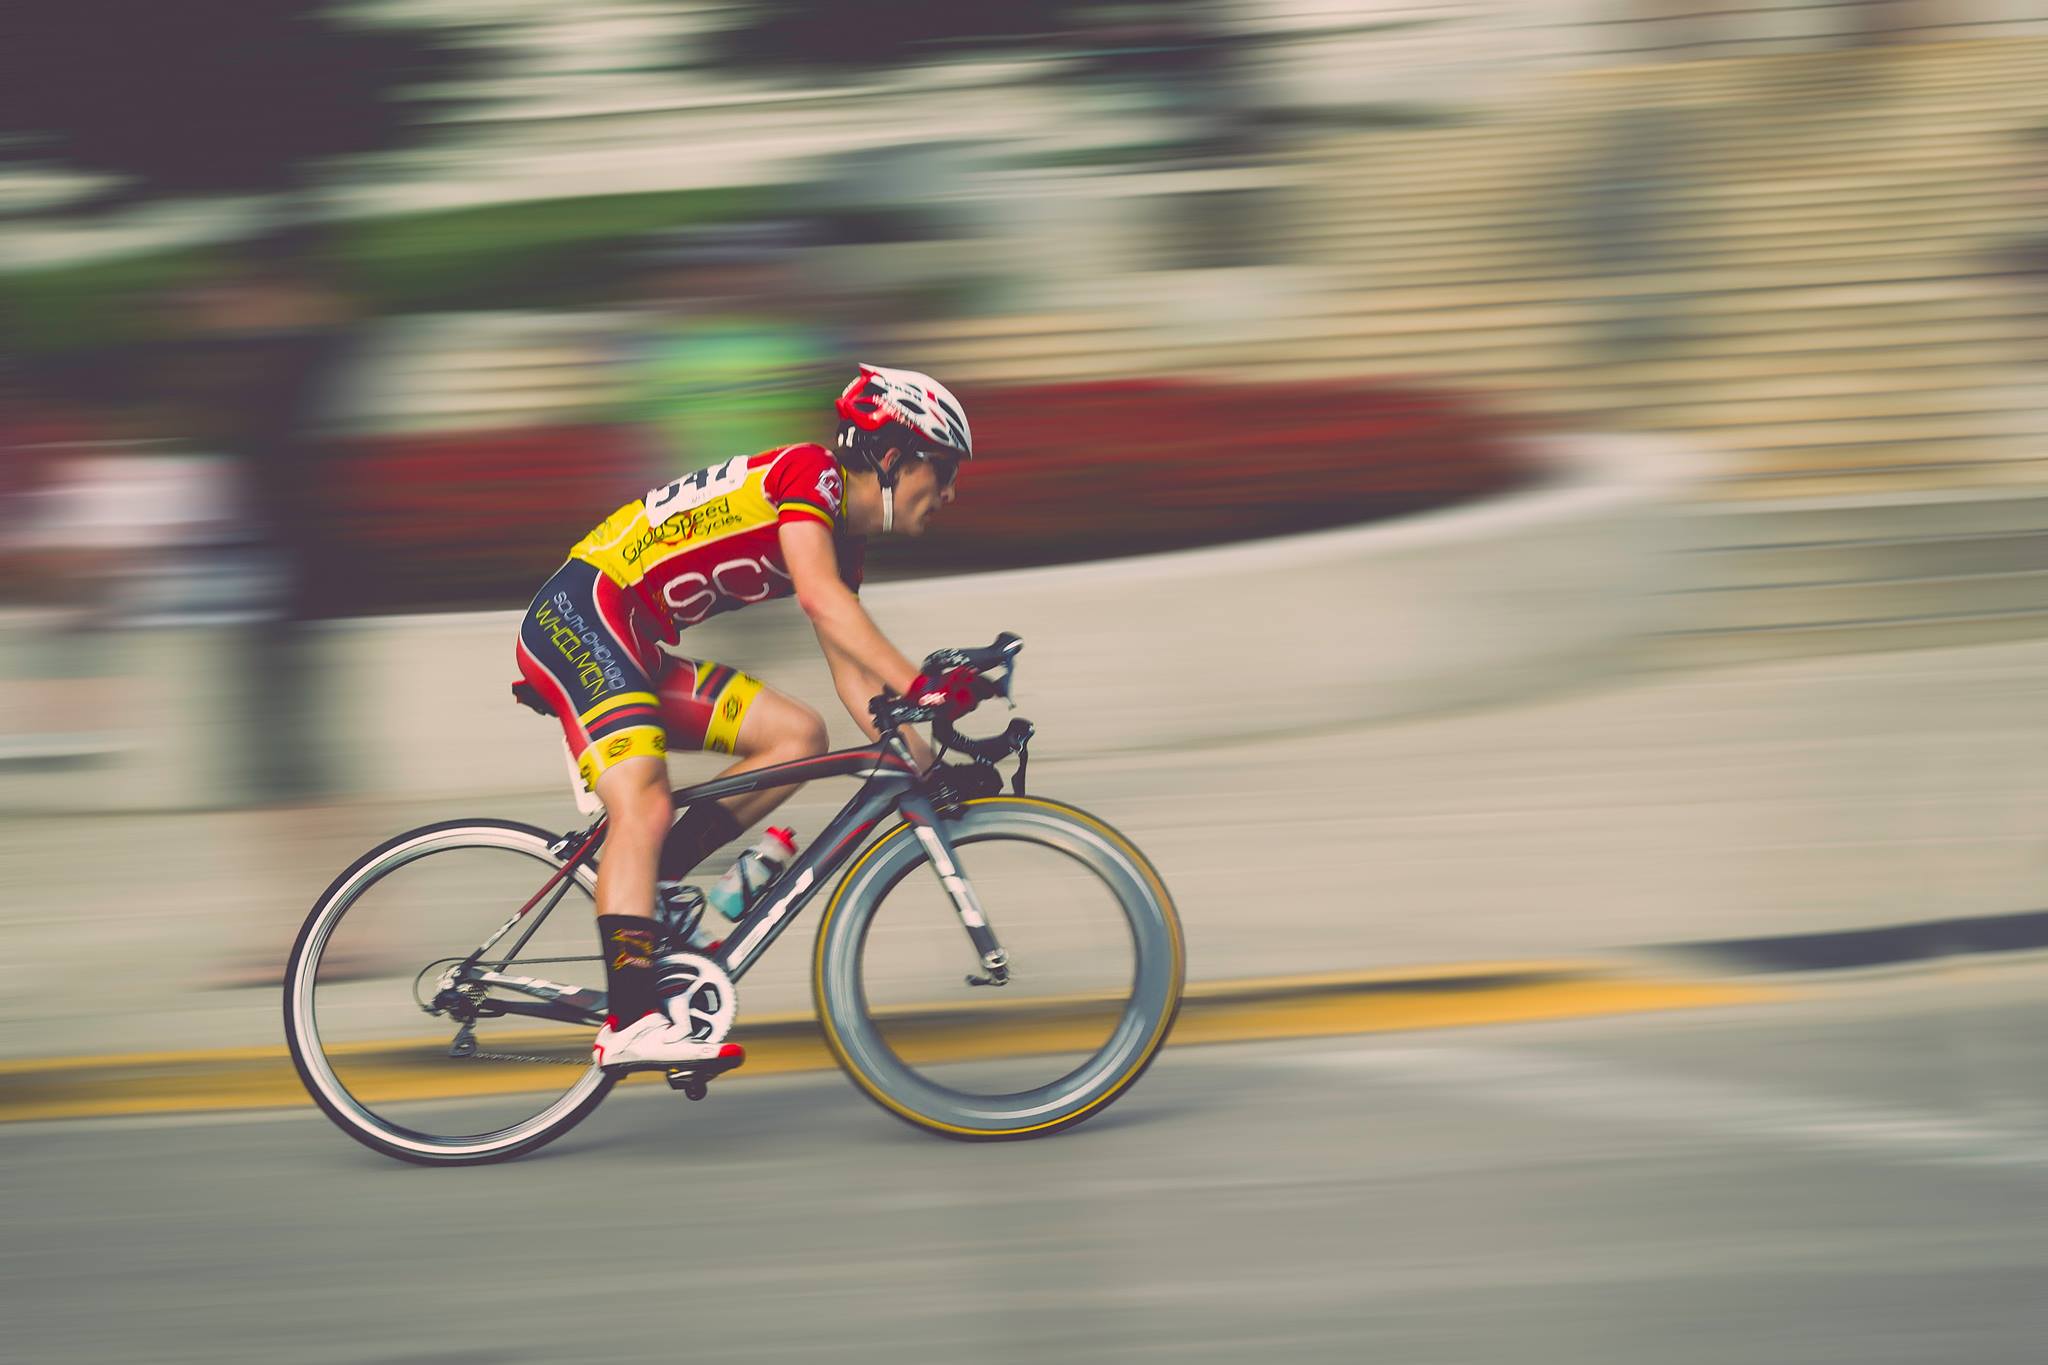 Cyclist at full speed